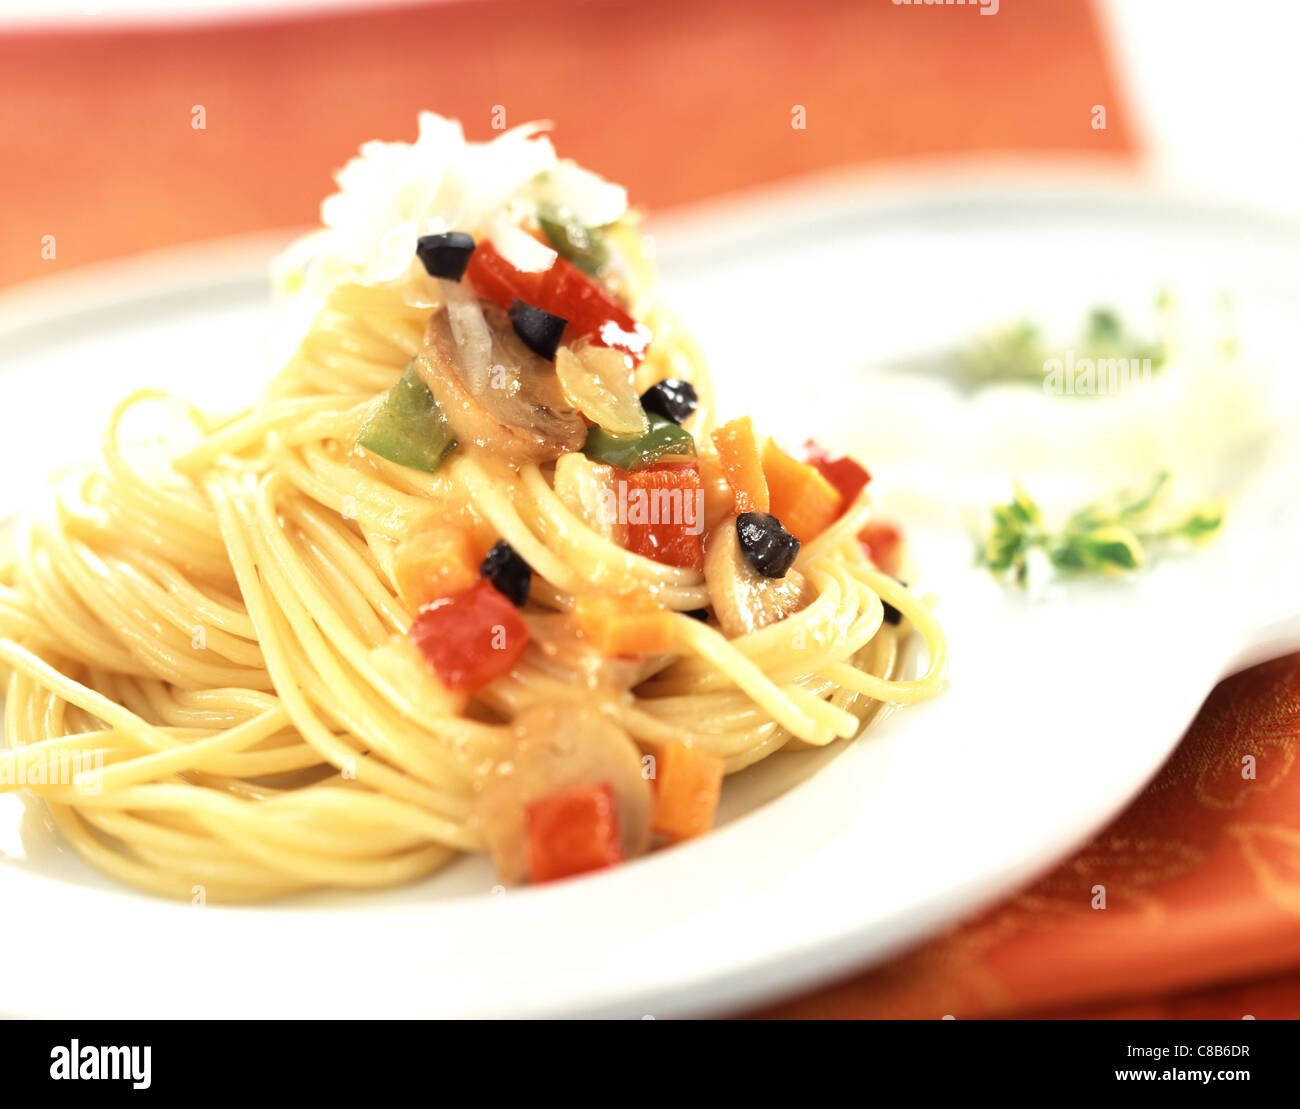 Spaghetti with diced vegetables Stock Photo